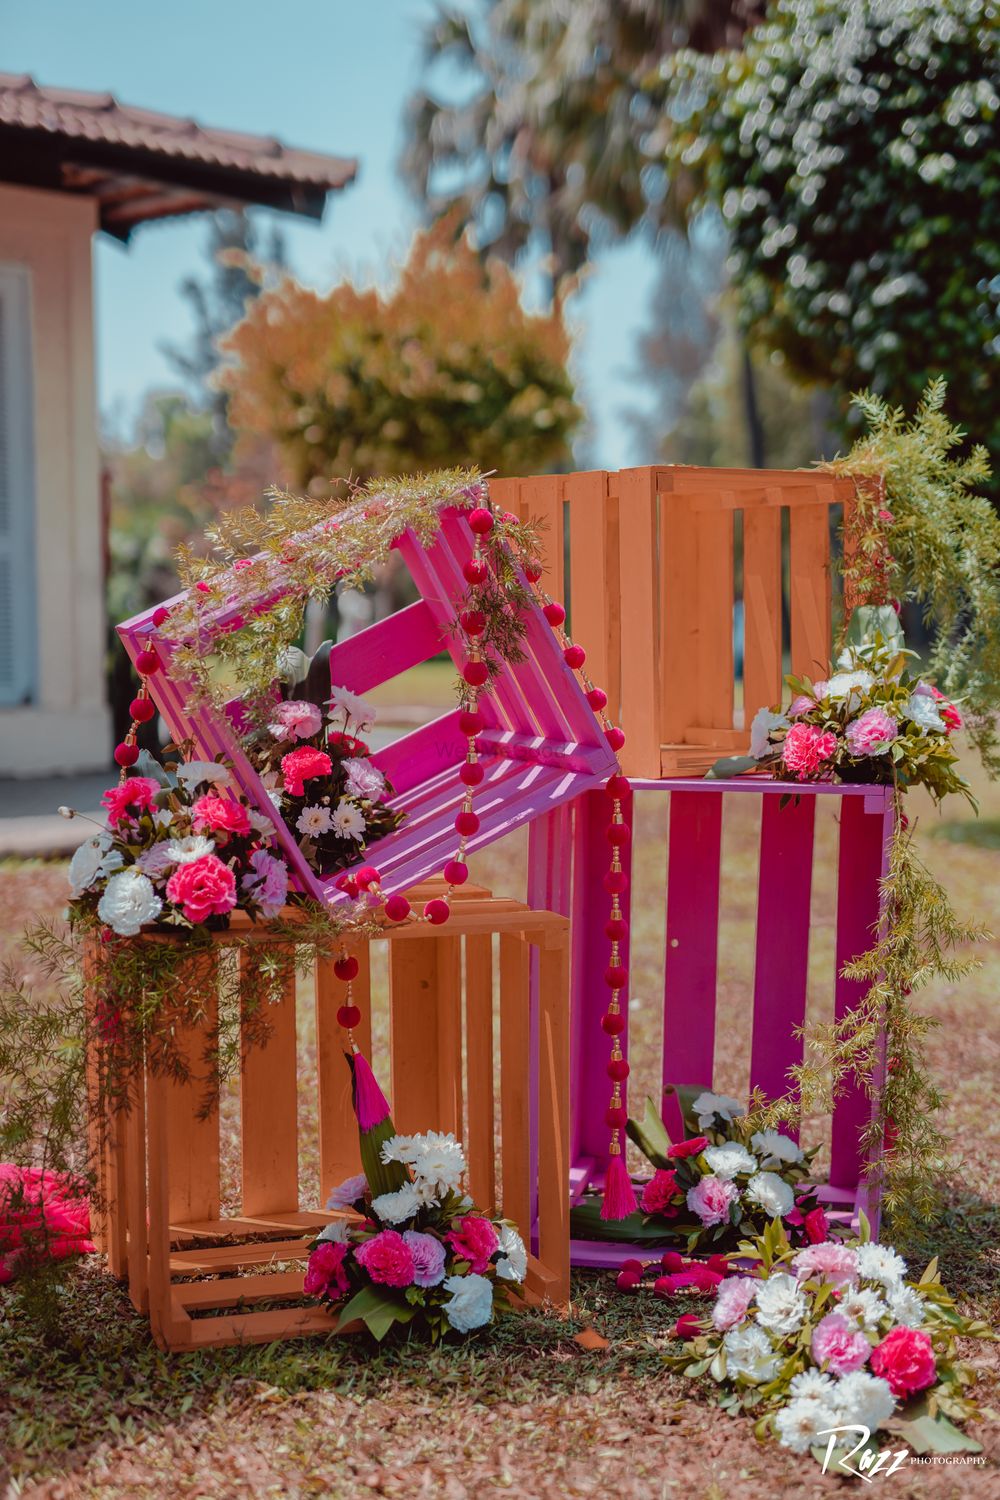 Photo of DIY decor with hand-painted wooden crates and flowers.